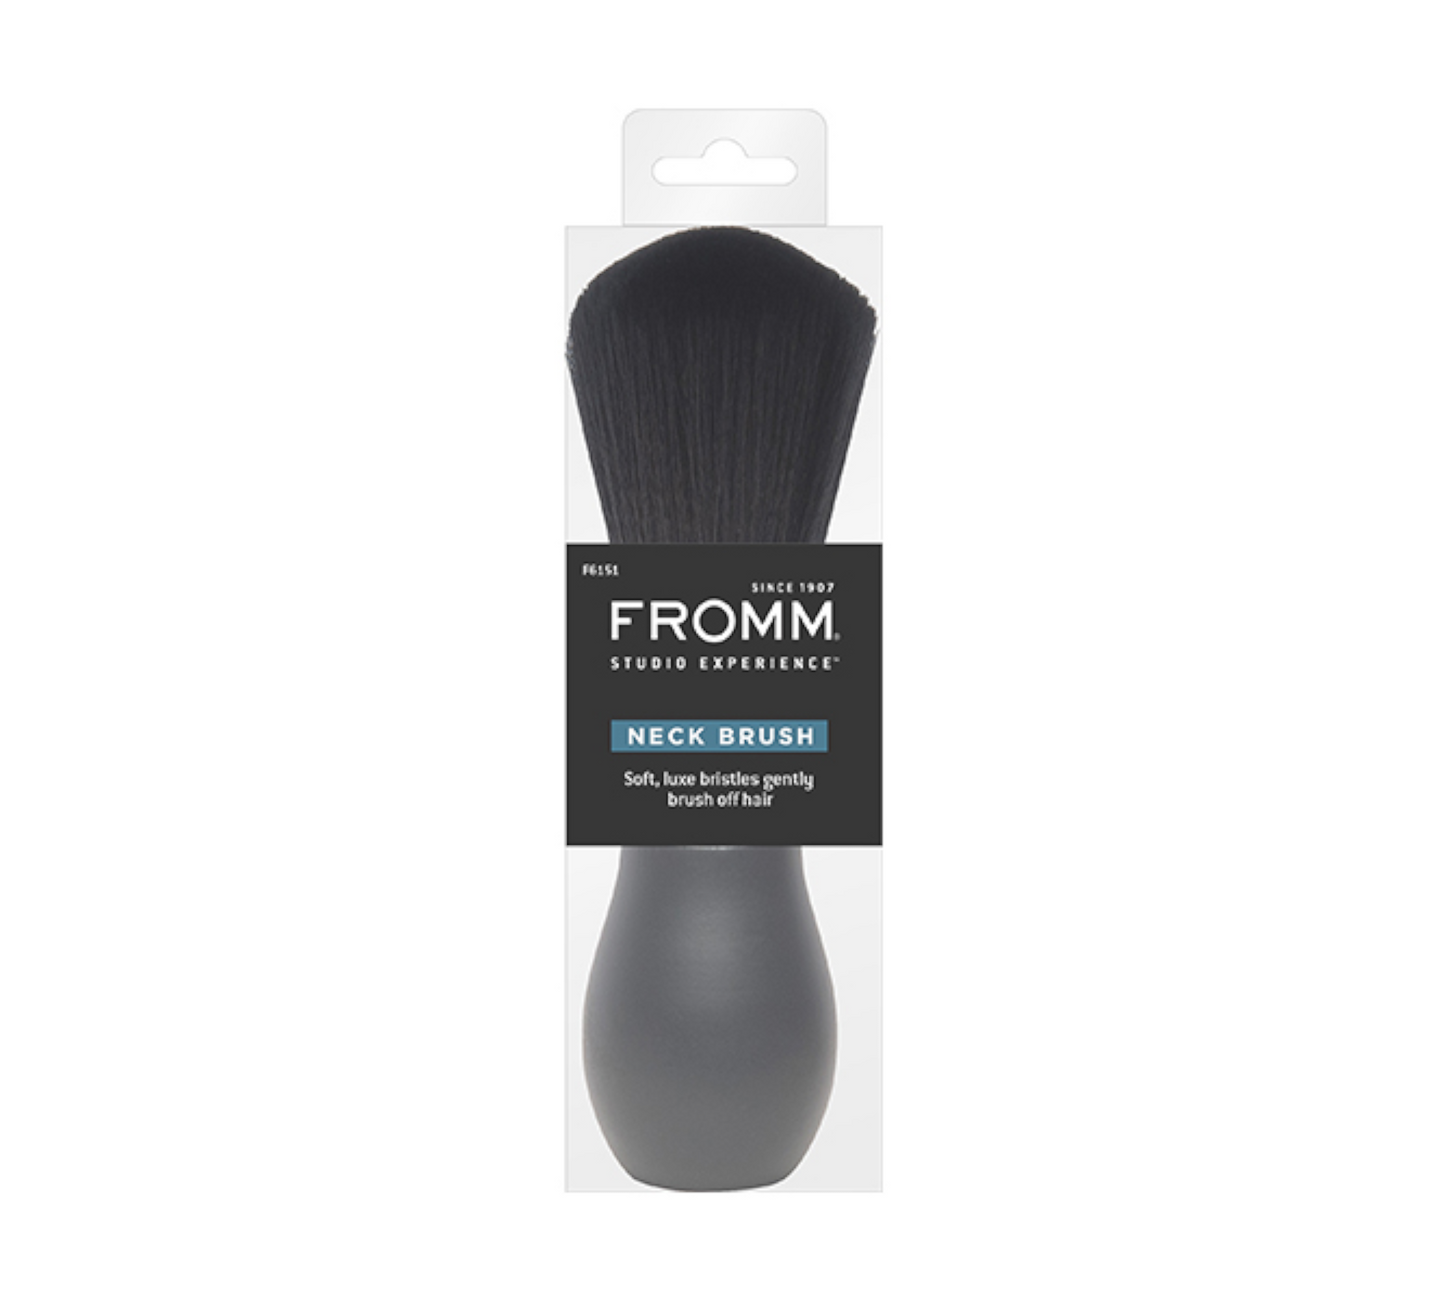 Fromm Studio Experience Neck Duster Black